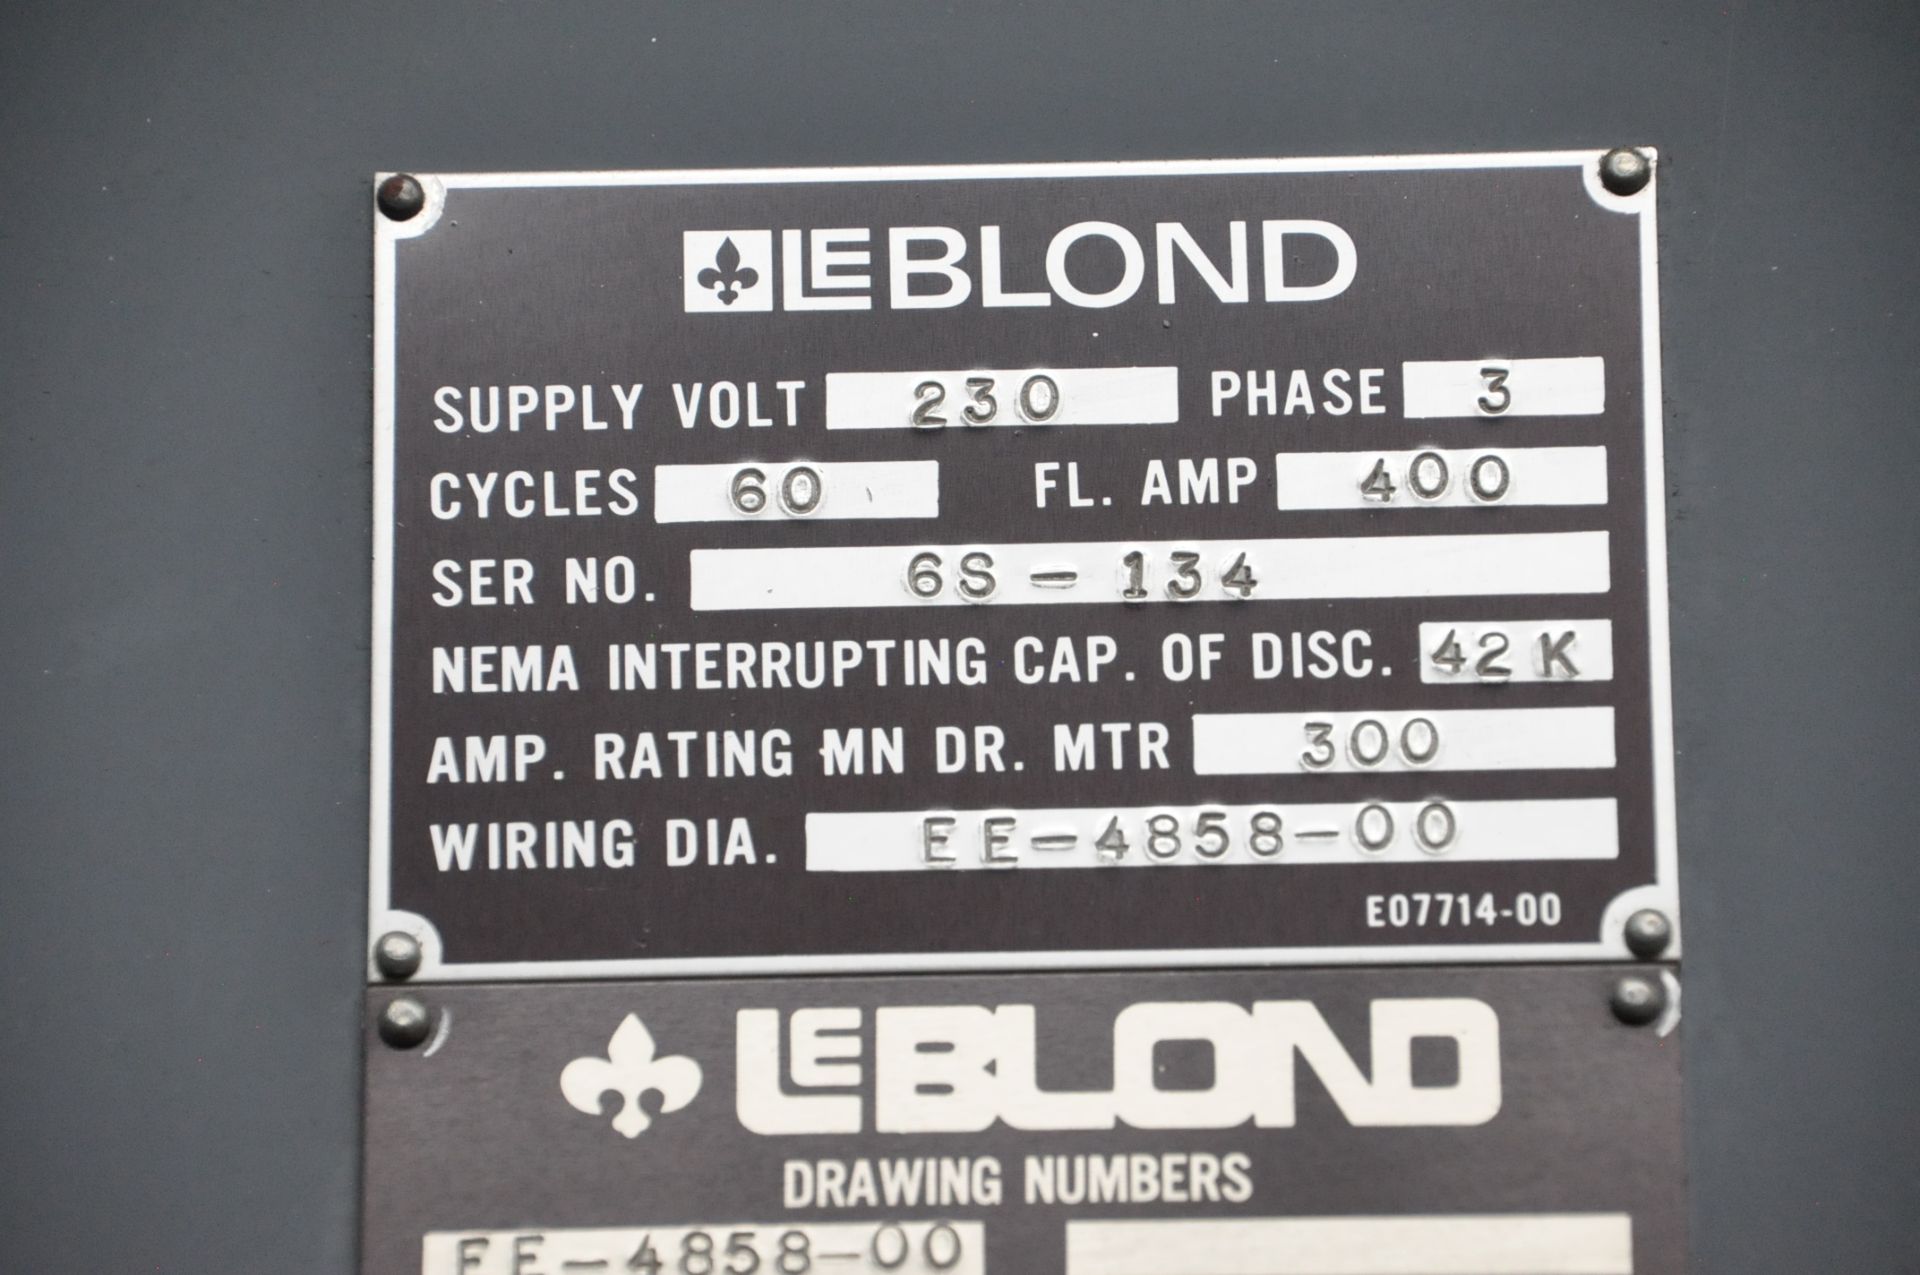 LeBlond Baron 60, CNC Turning Center, S/n N/a, General Electric Mark Century 1050 CNC Controller, - Image 10 of 10